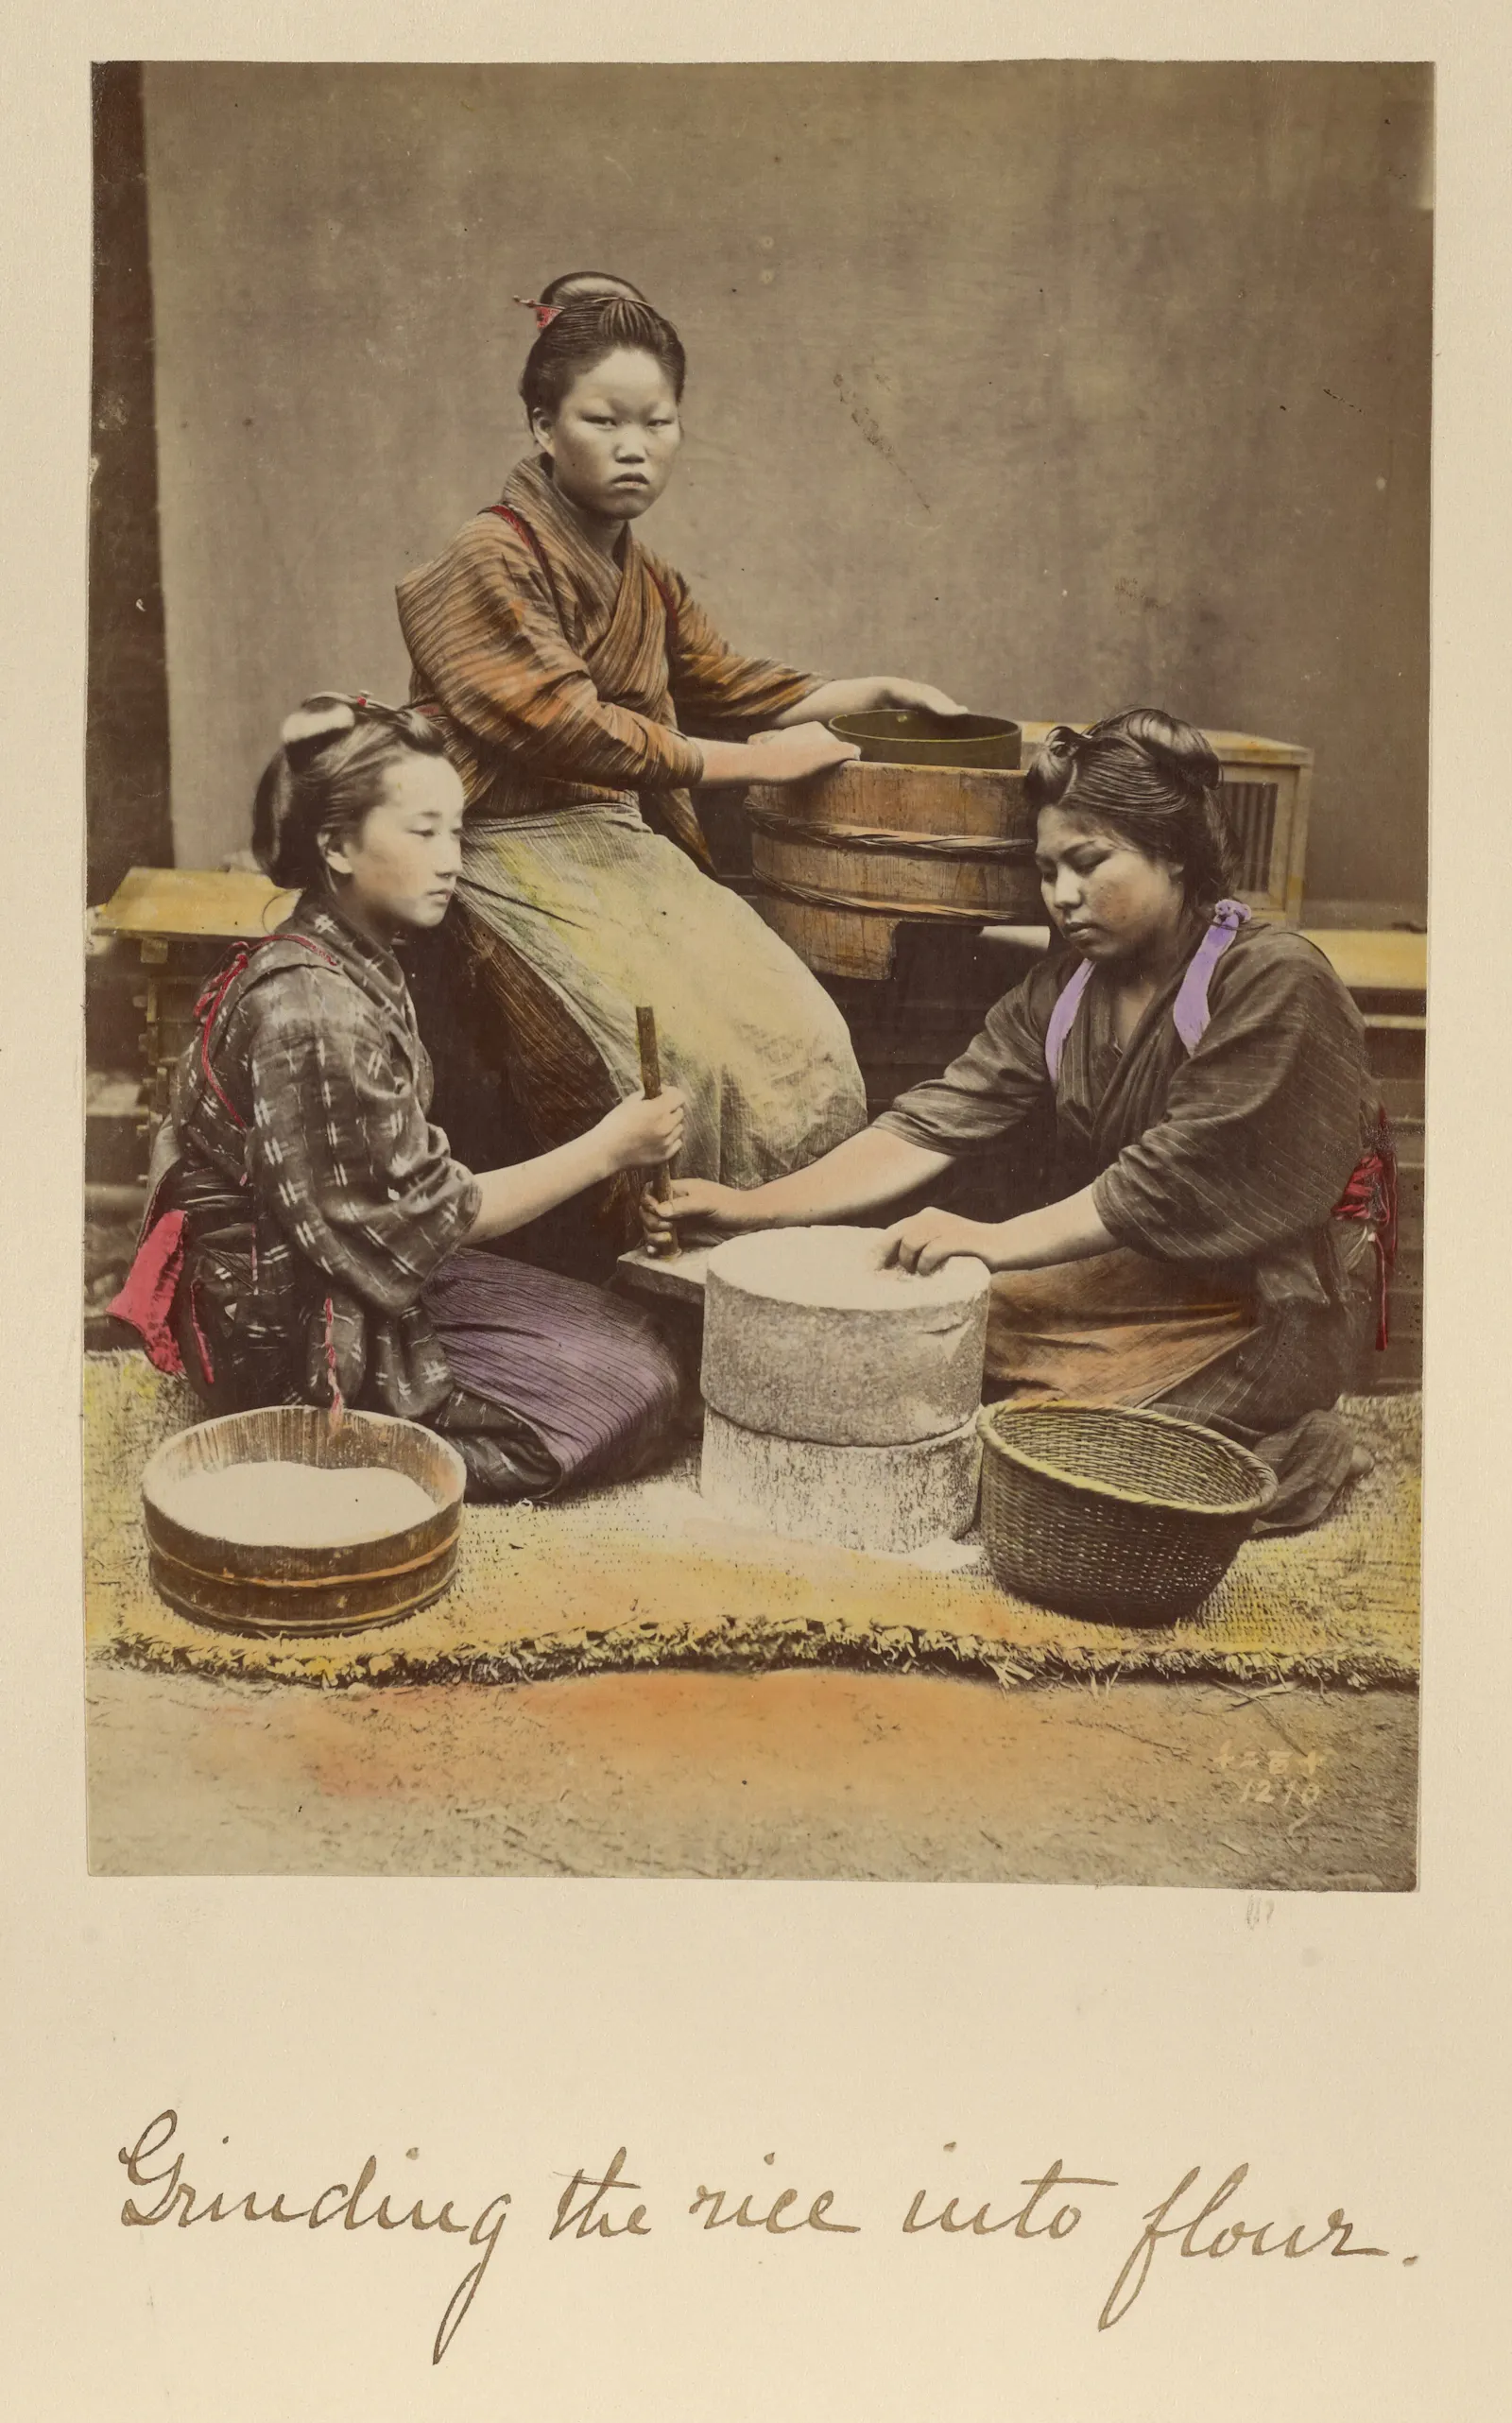 Shinichi Suzuki (Japanese, 1835 - 1919), photographer
Grinding the rice into flour, about 1873–1883
Hand-colored albumen silver print
Image: 17.2 × 12.7 cm (6 3/4 × 5 in.)
The J. Paul Getty Museum, Los Angeles, 84.XA.765.8.64